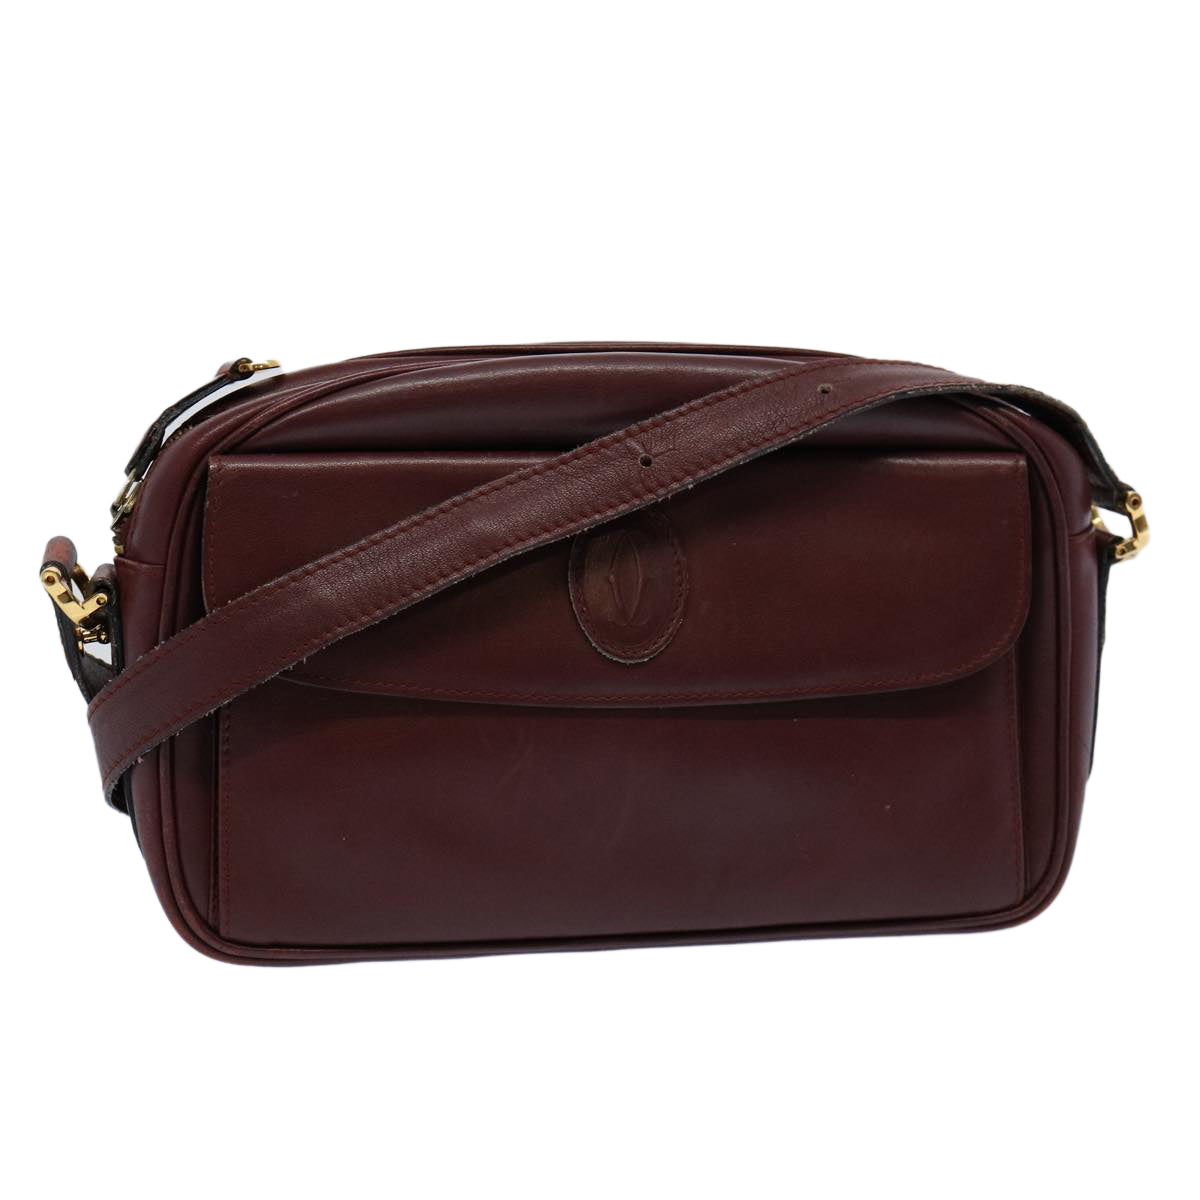 CARTIER Shoulder Bag Leather Wine Red Auth 60969